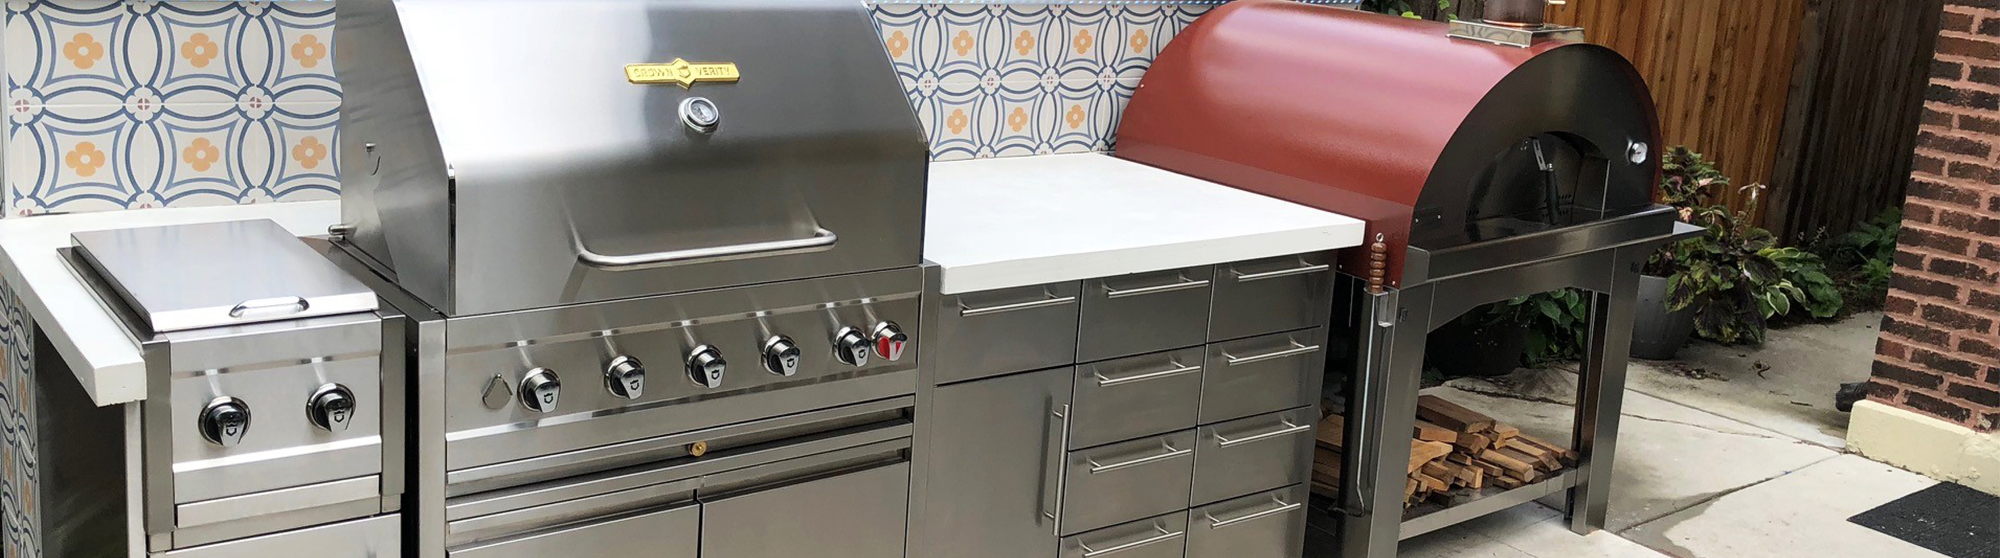 Stainless steel pull out drawers for outdoor kitchen with bbq and backsplash.